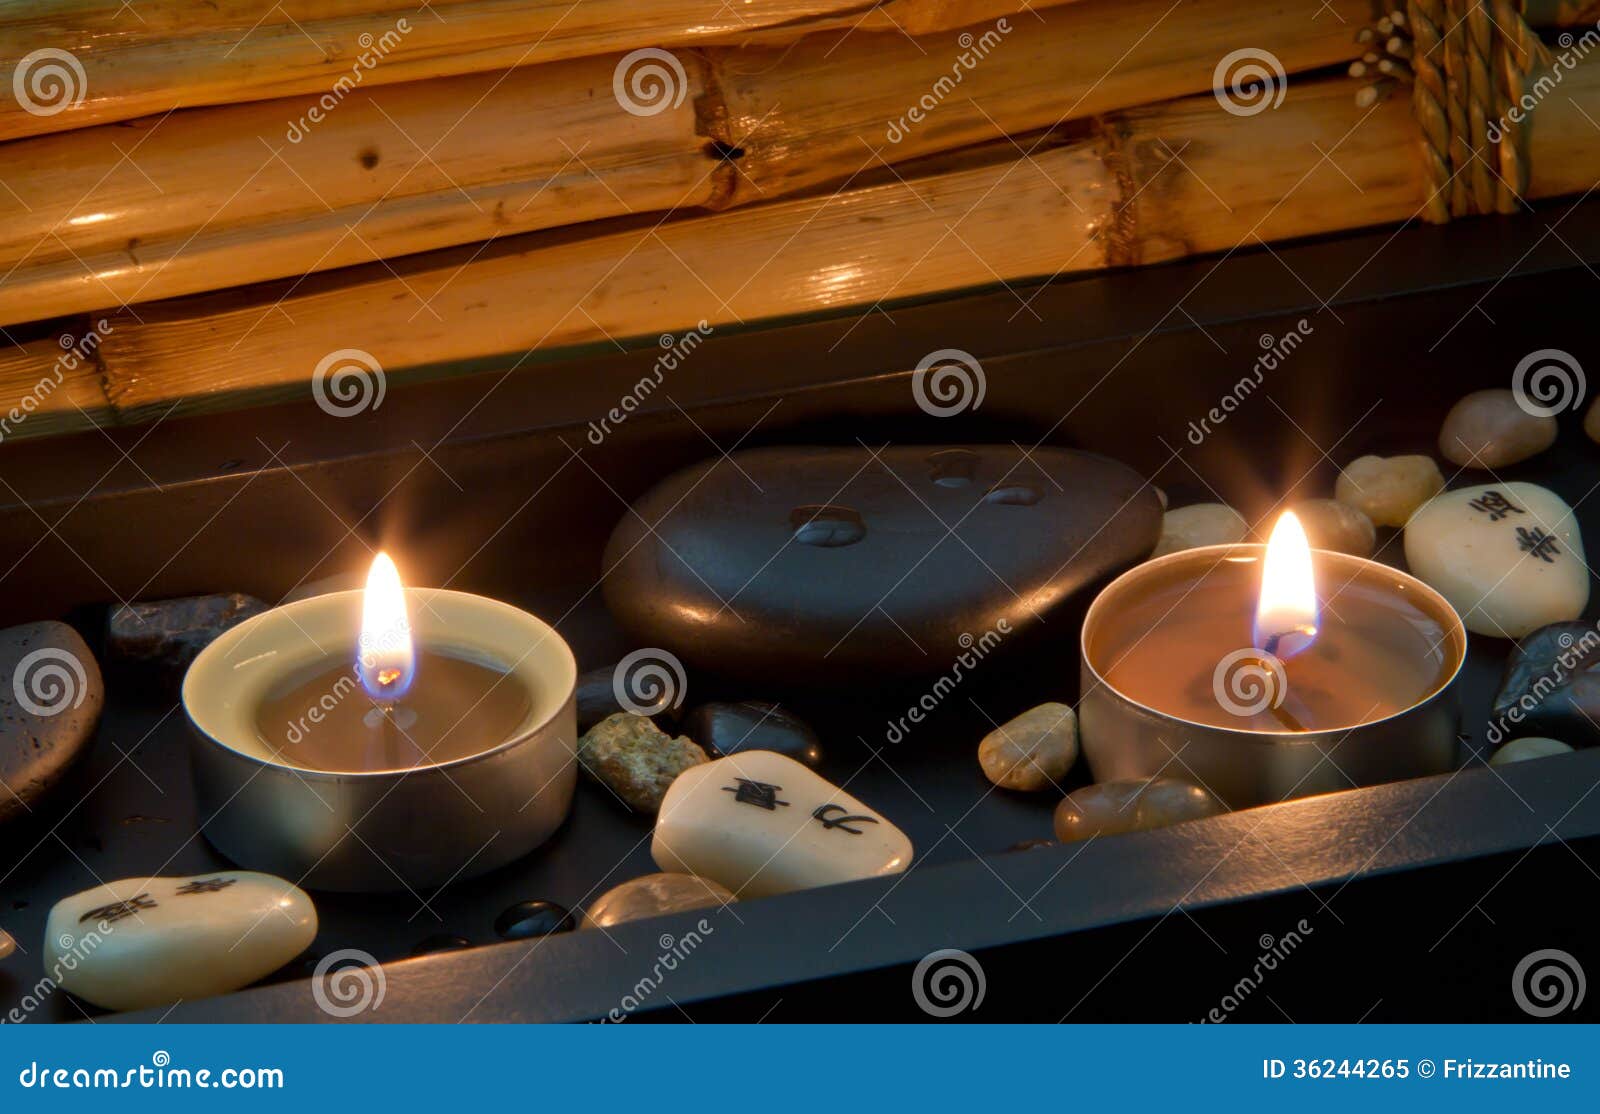 Spa Decoration In Asian Style With Stones And Candle Royalty Free ...